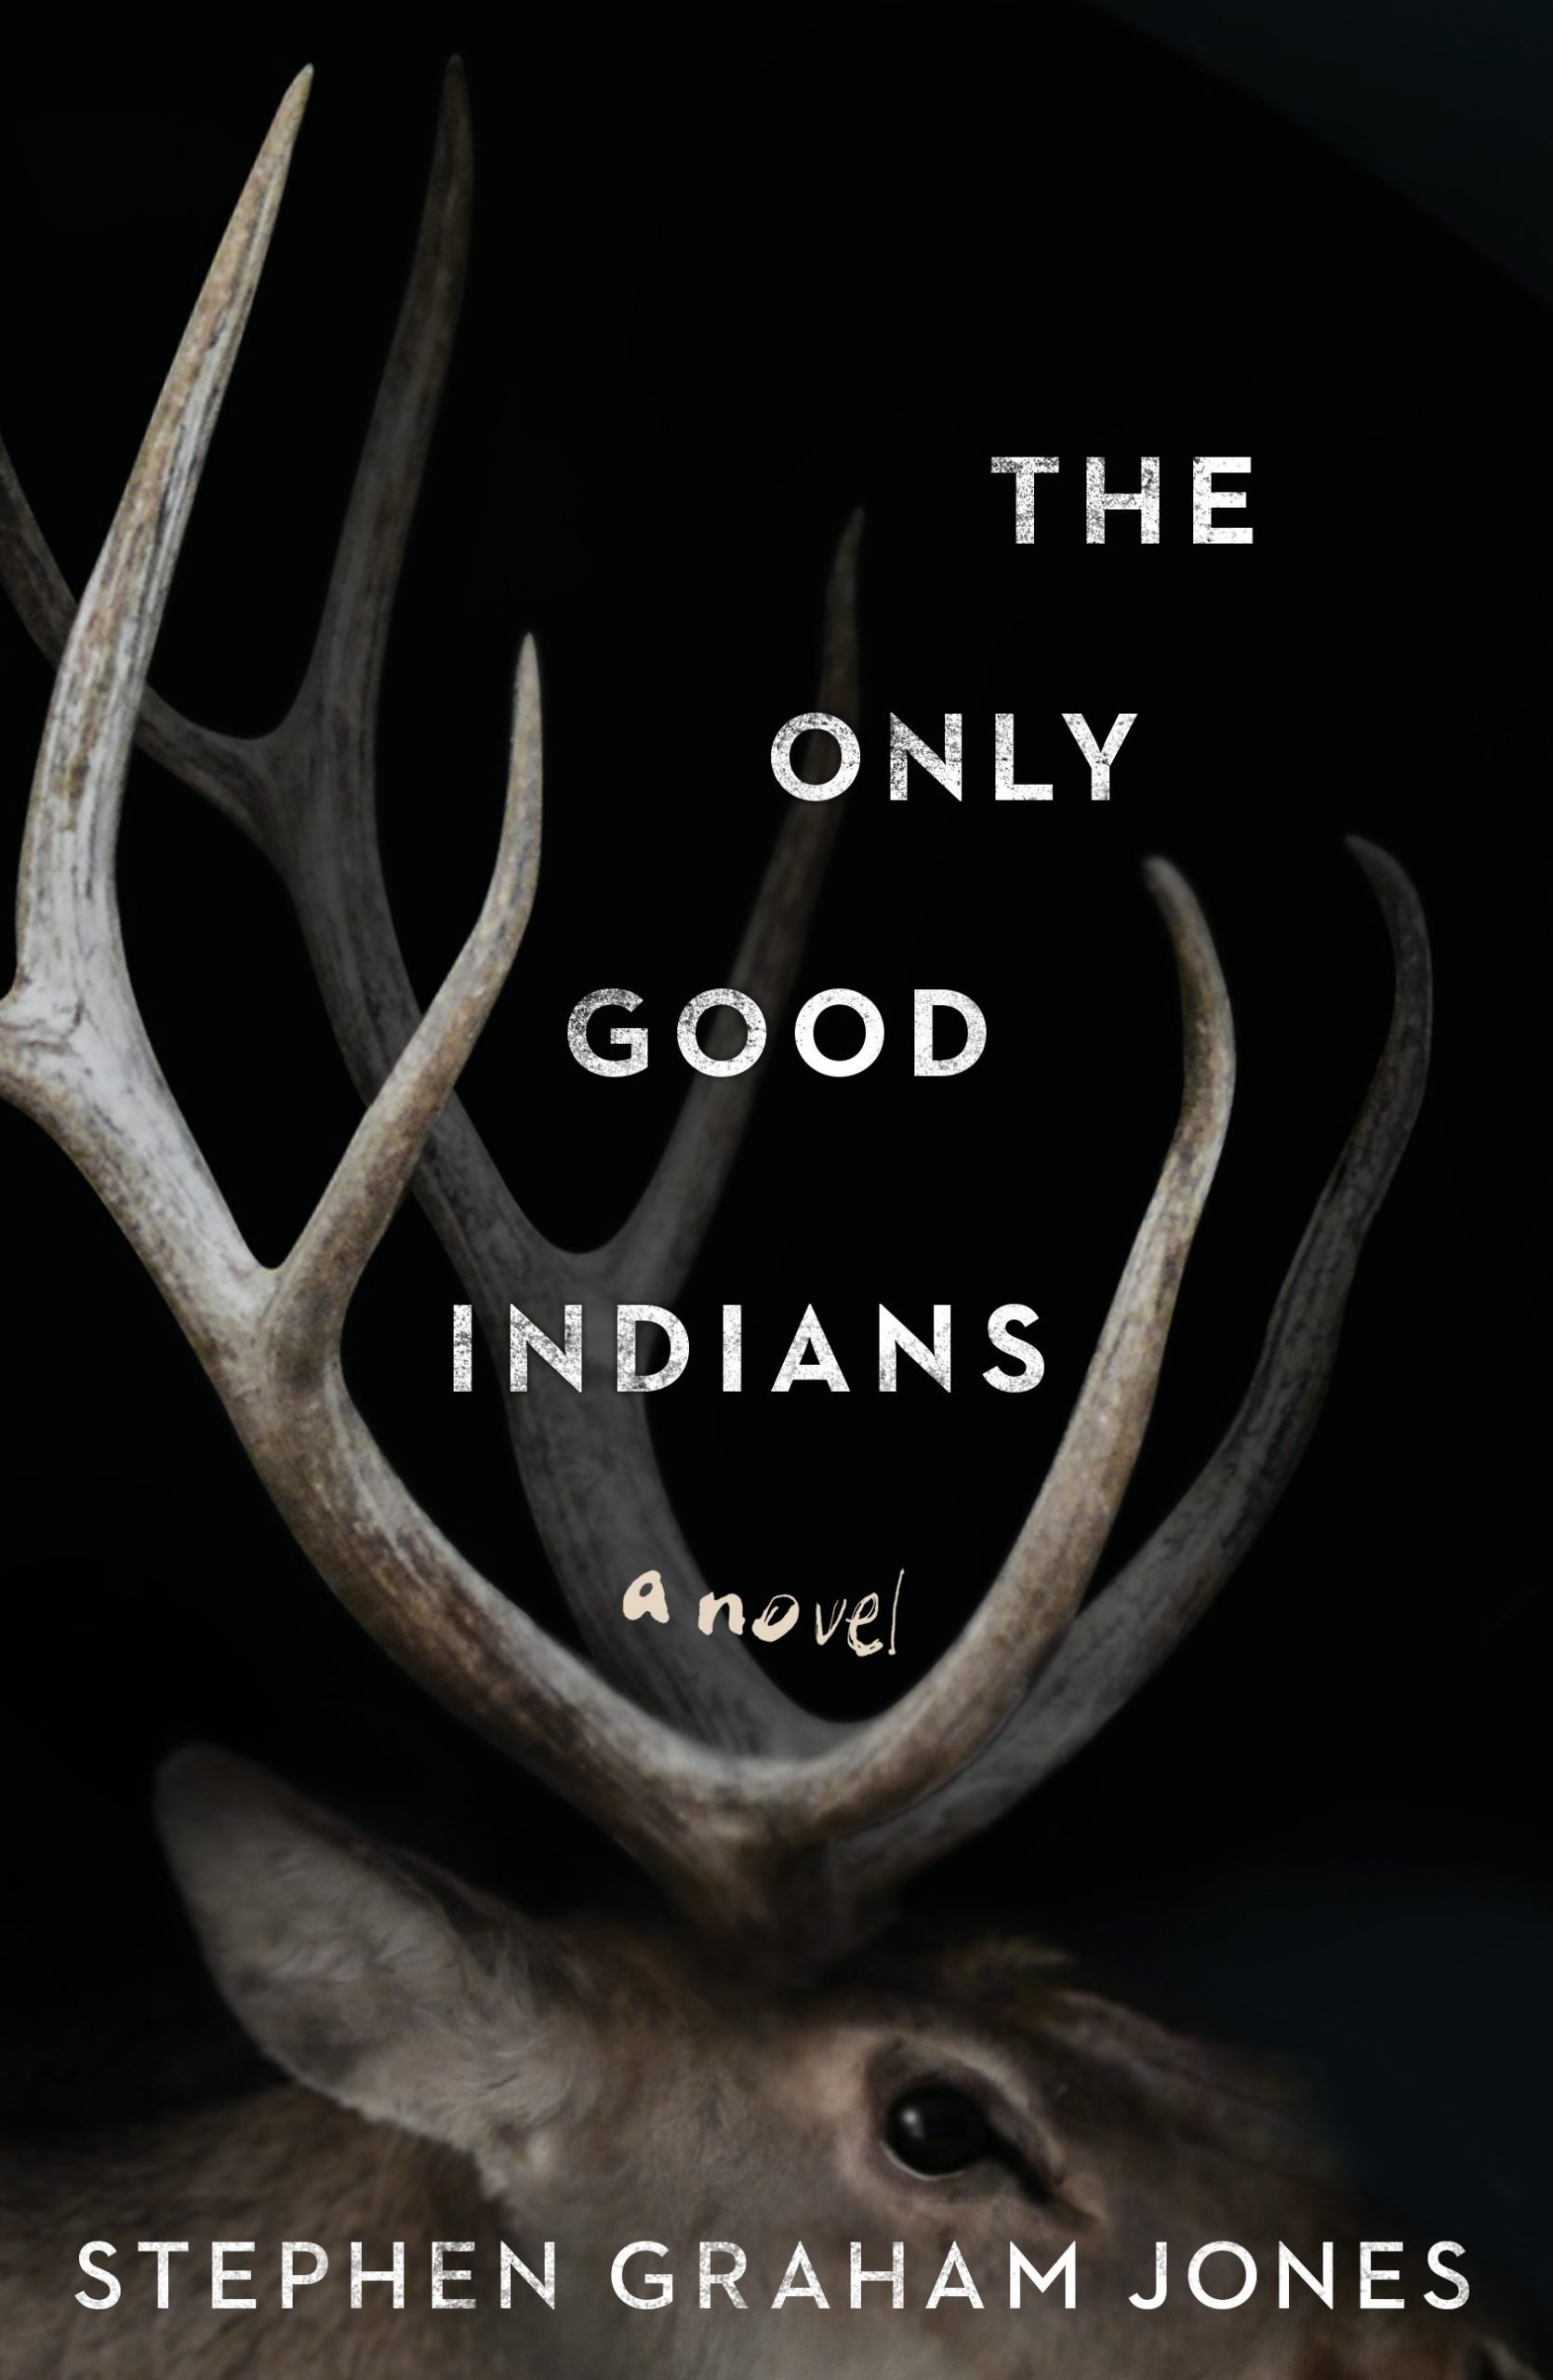 The Only Good Indians Book Release Date? 2020 Horror Fantasy Publications